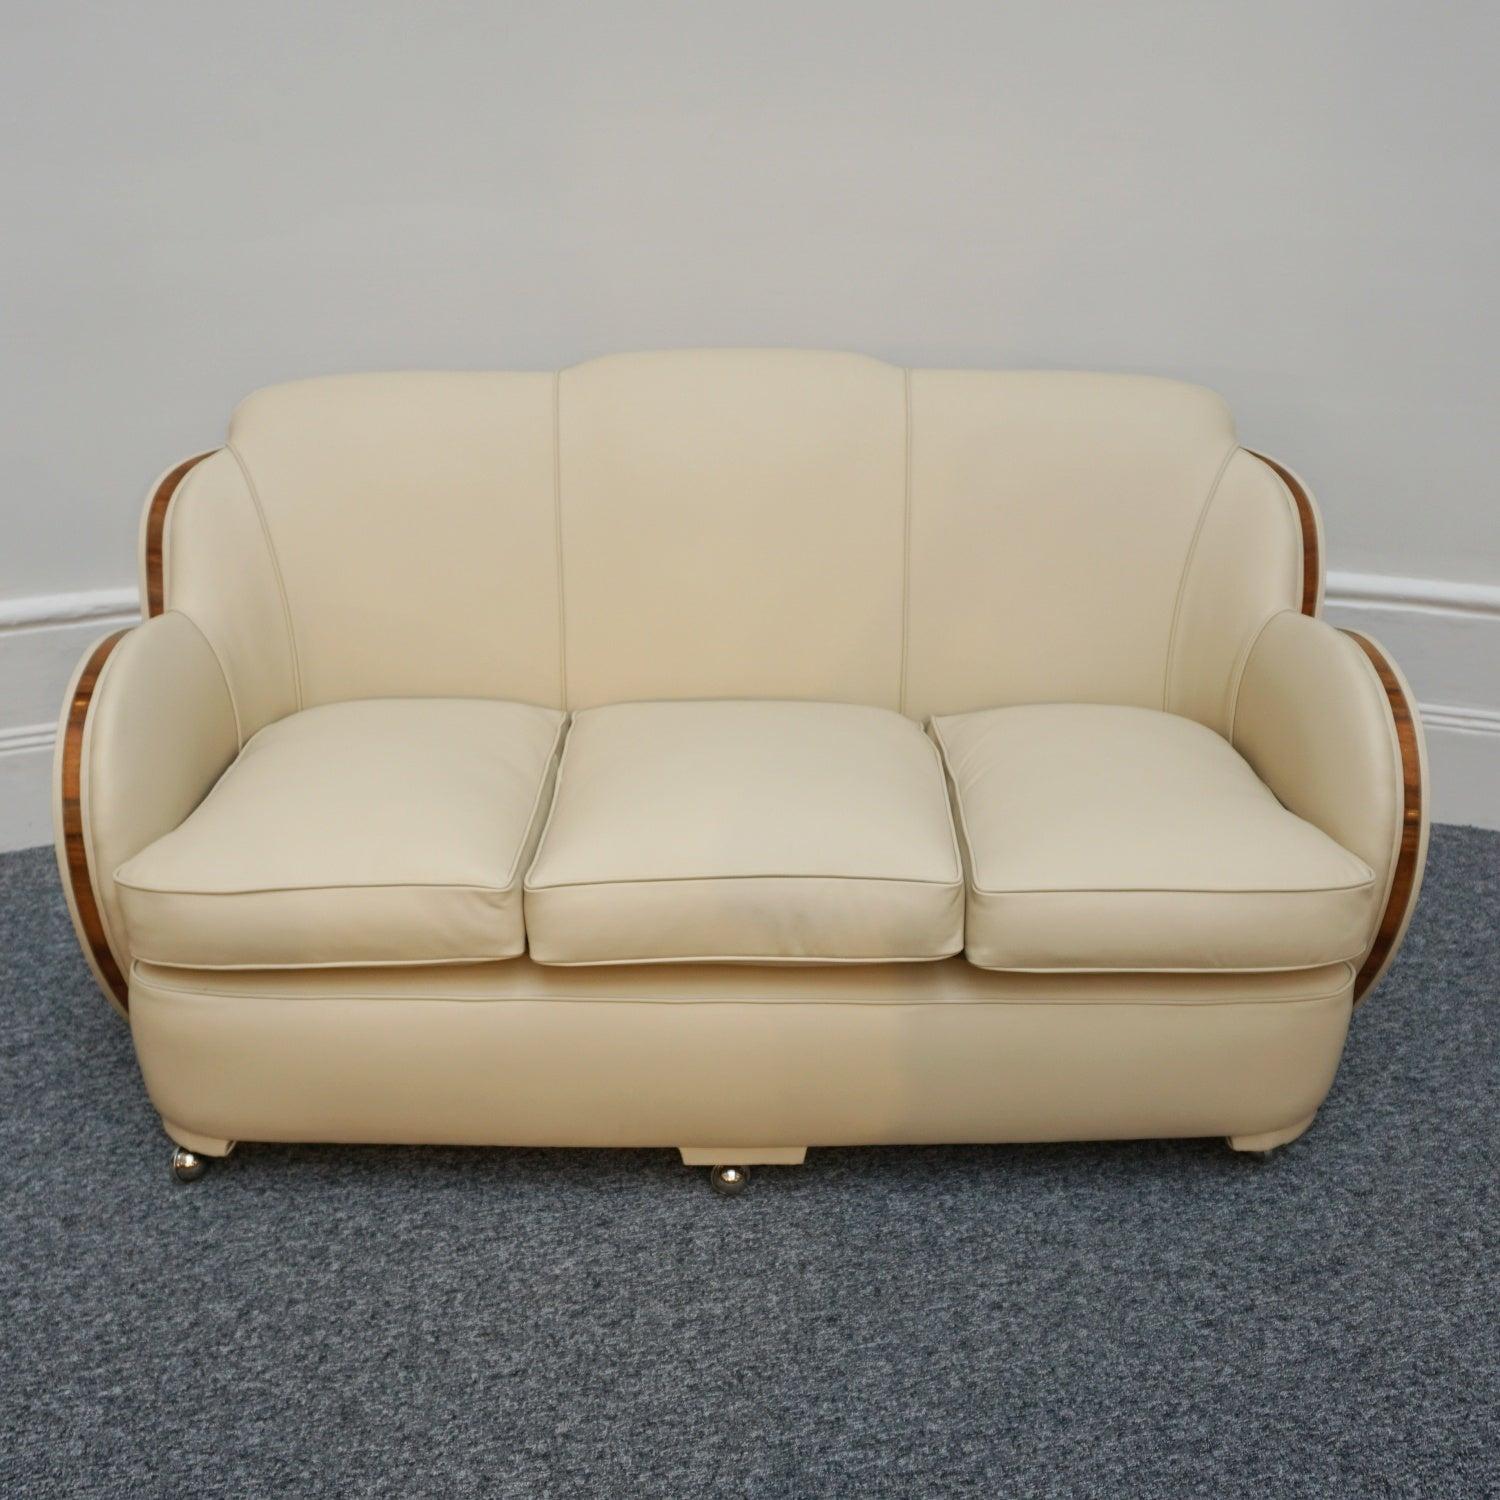 Art Deco Cloud Sofa Re-Upholstered in Cream Leather with Walnut Banding 6